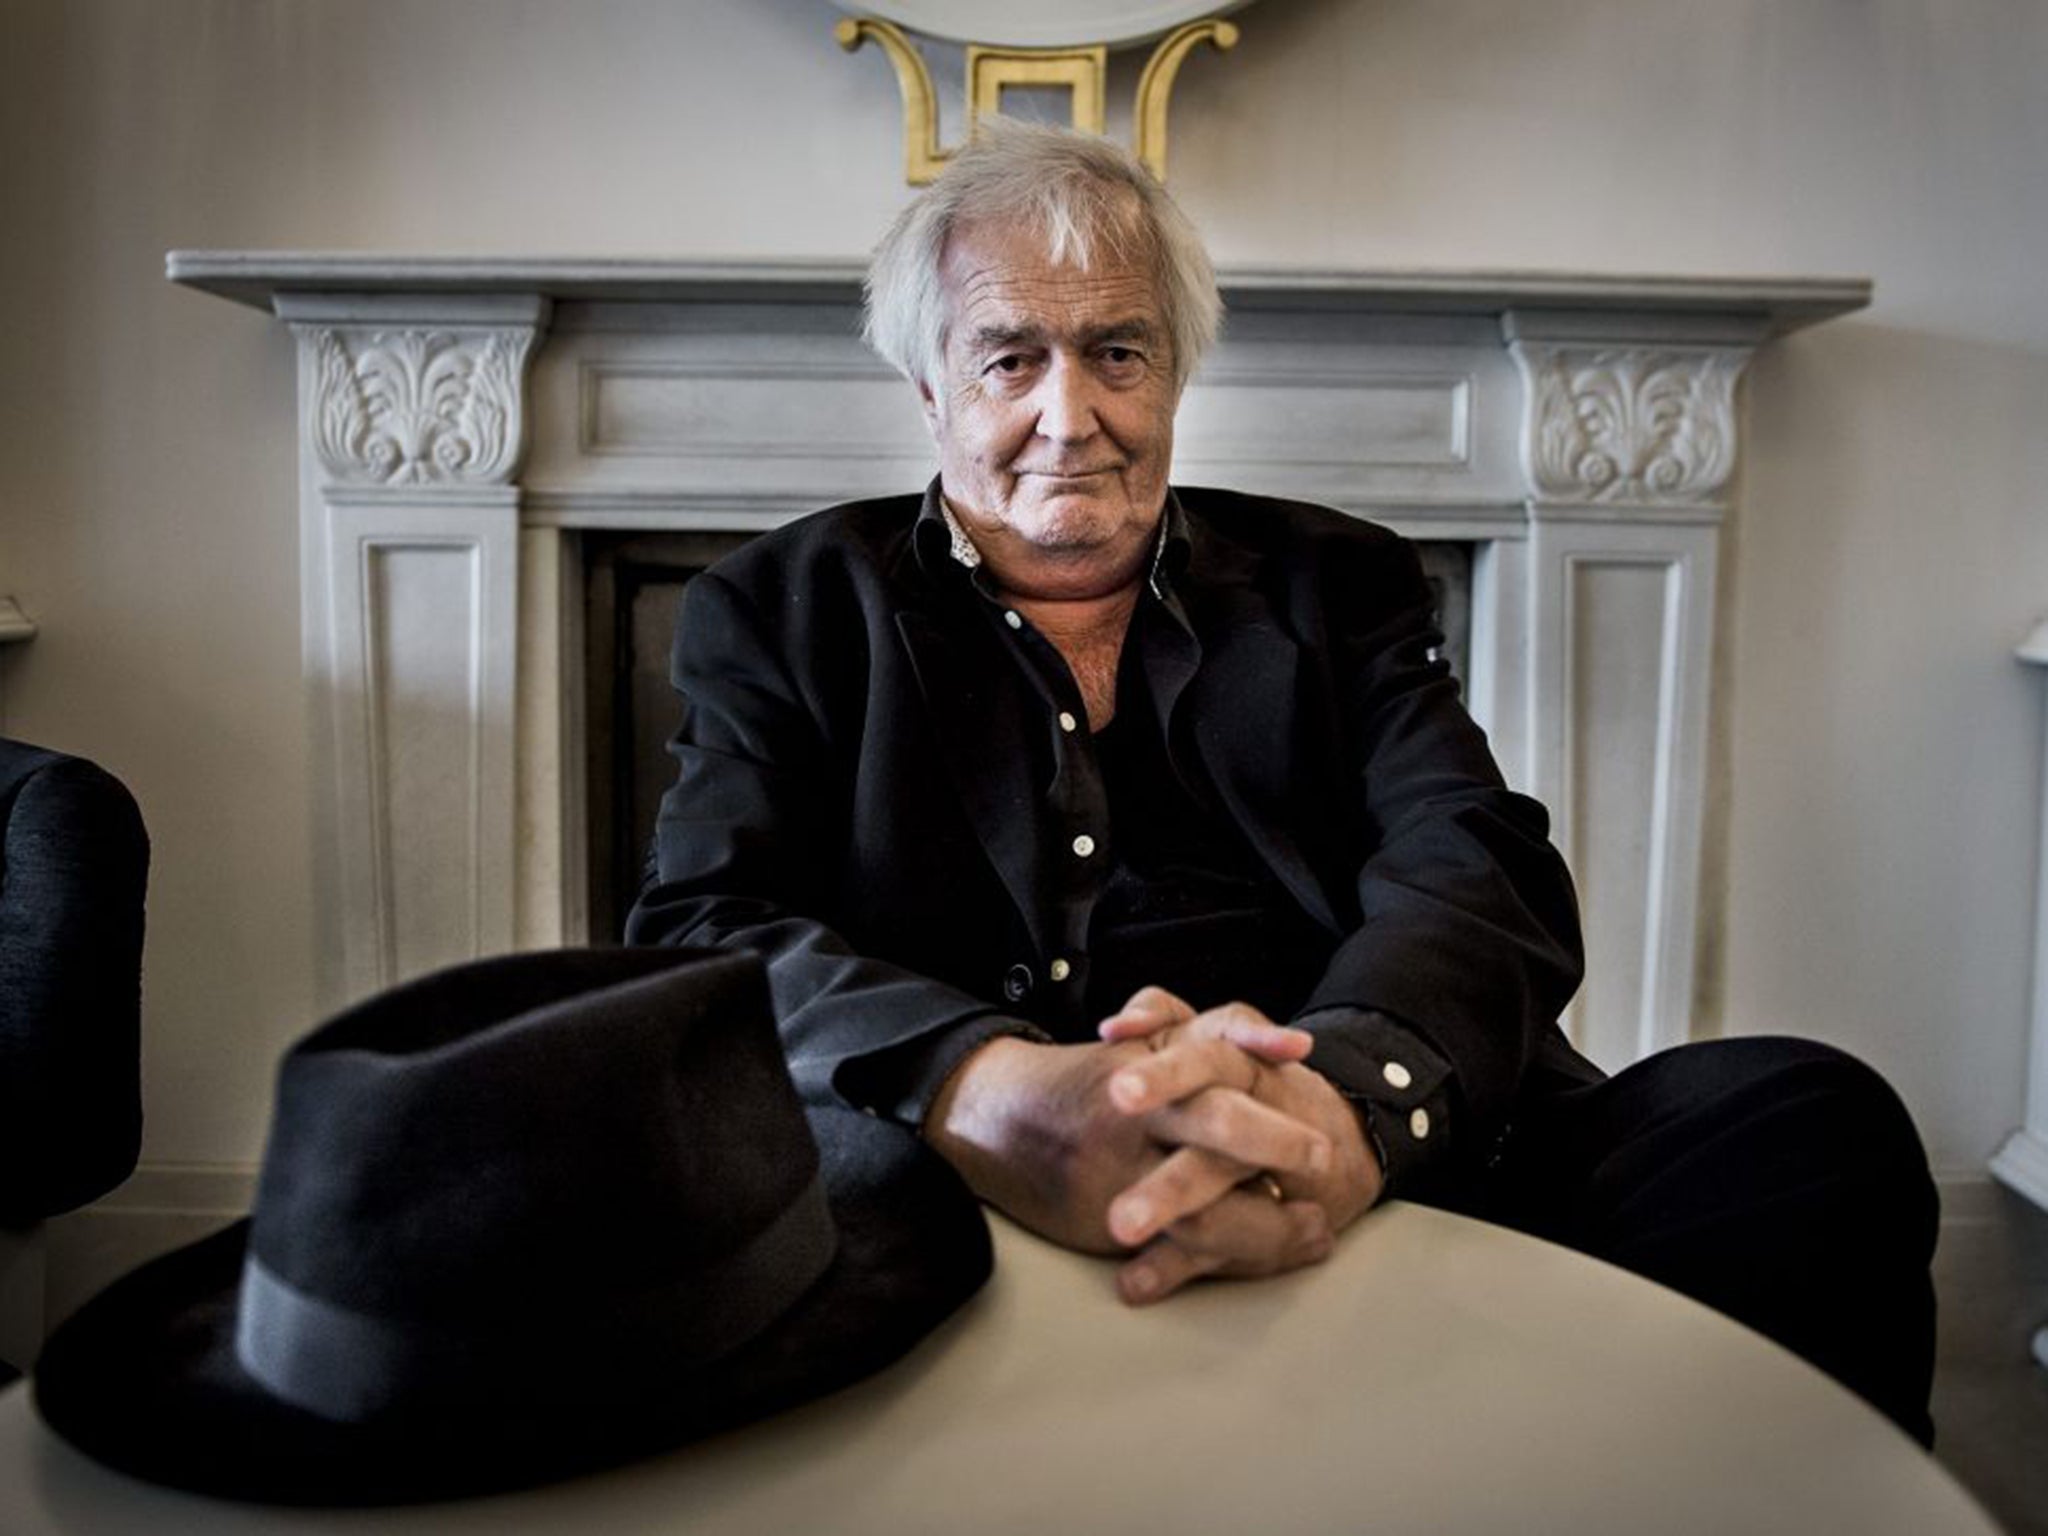 Henning Mankell was proud to discuss grand themes within his novels